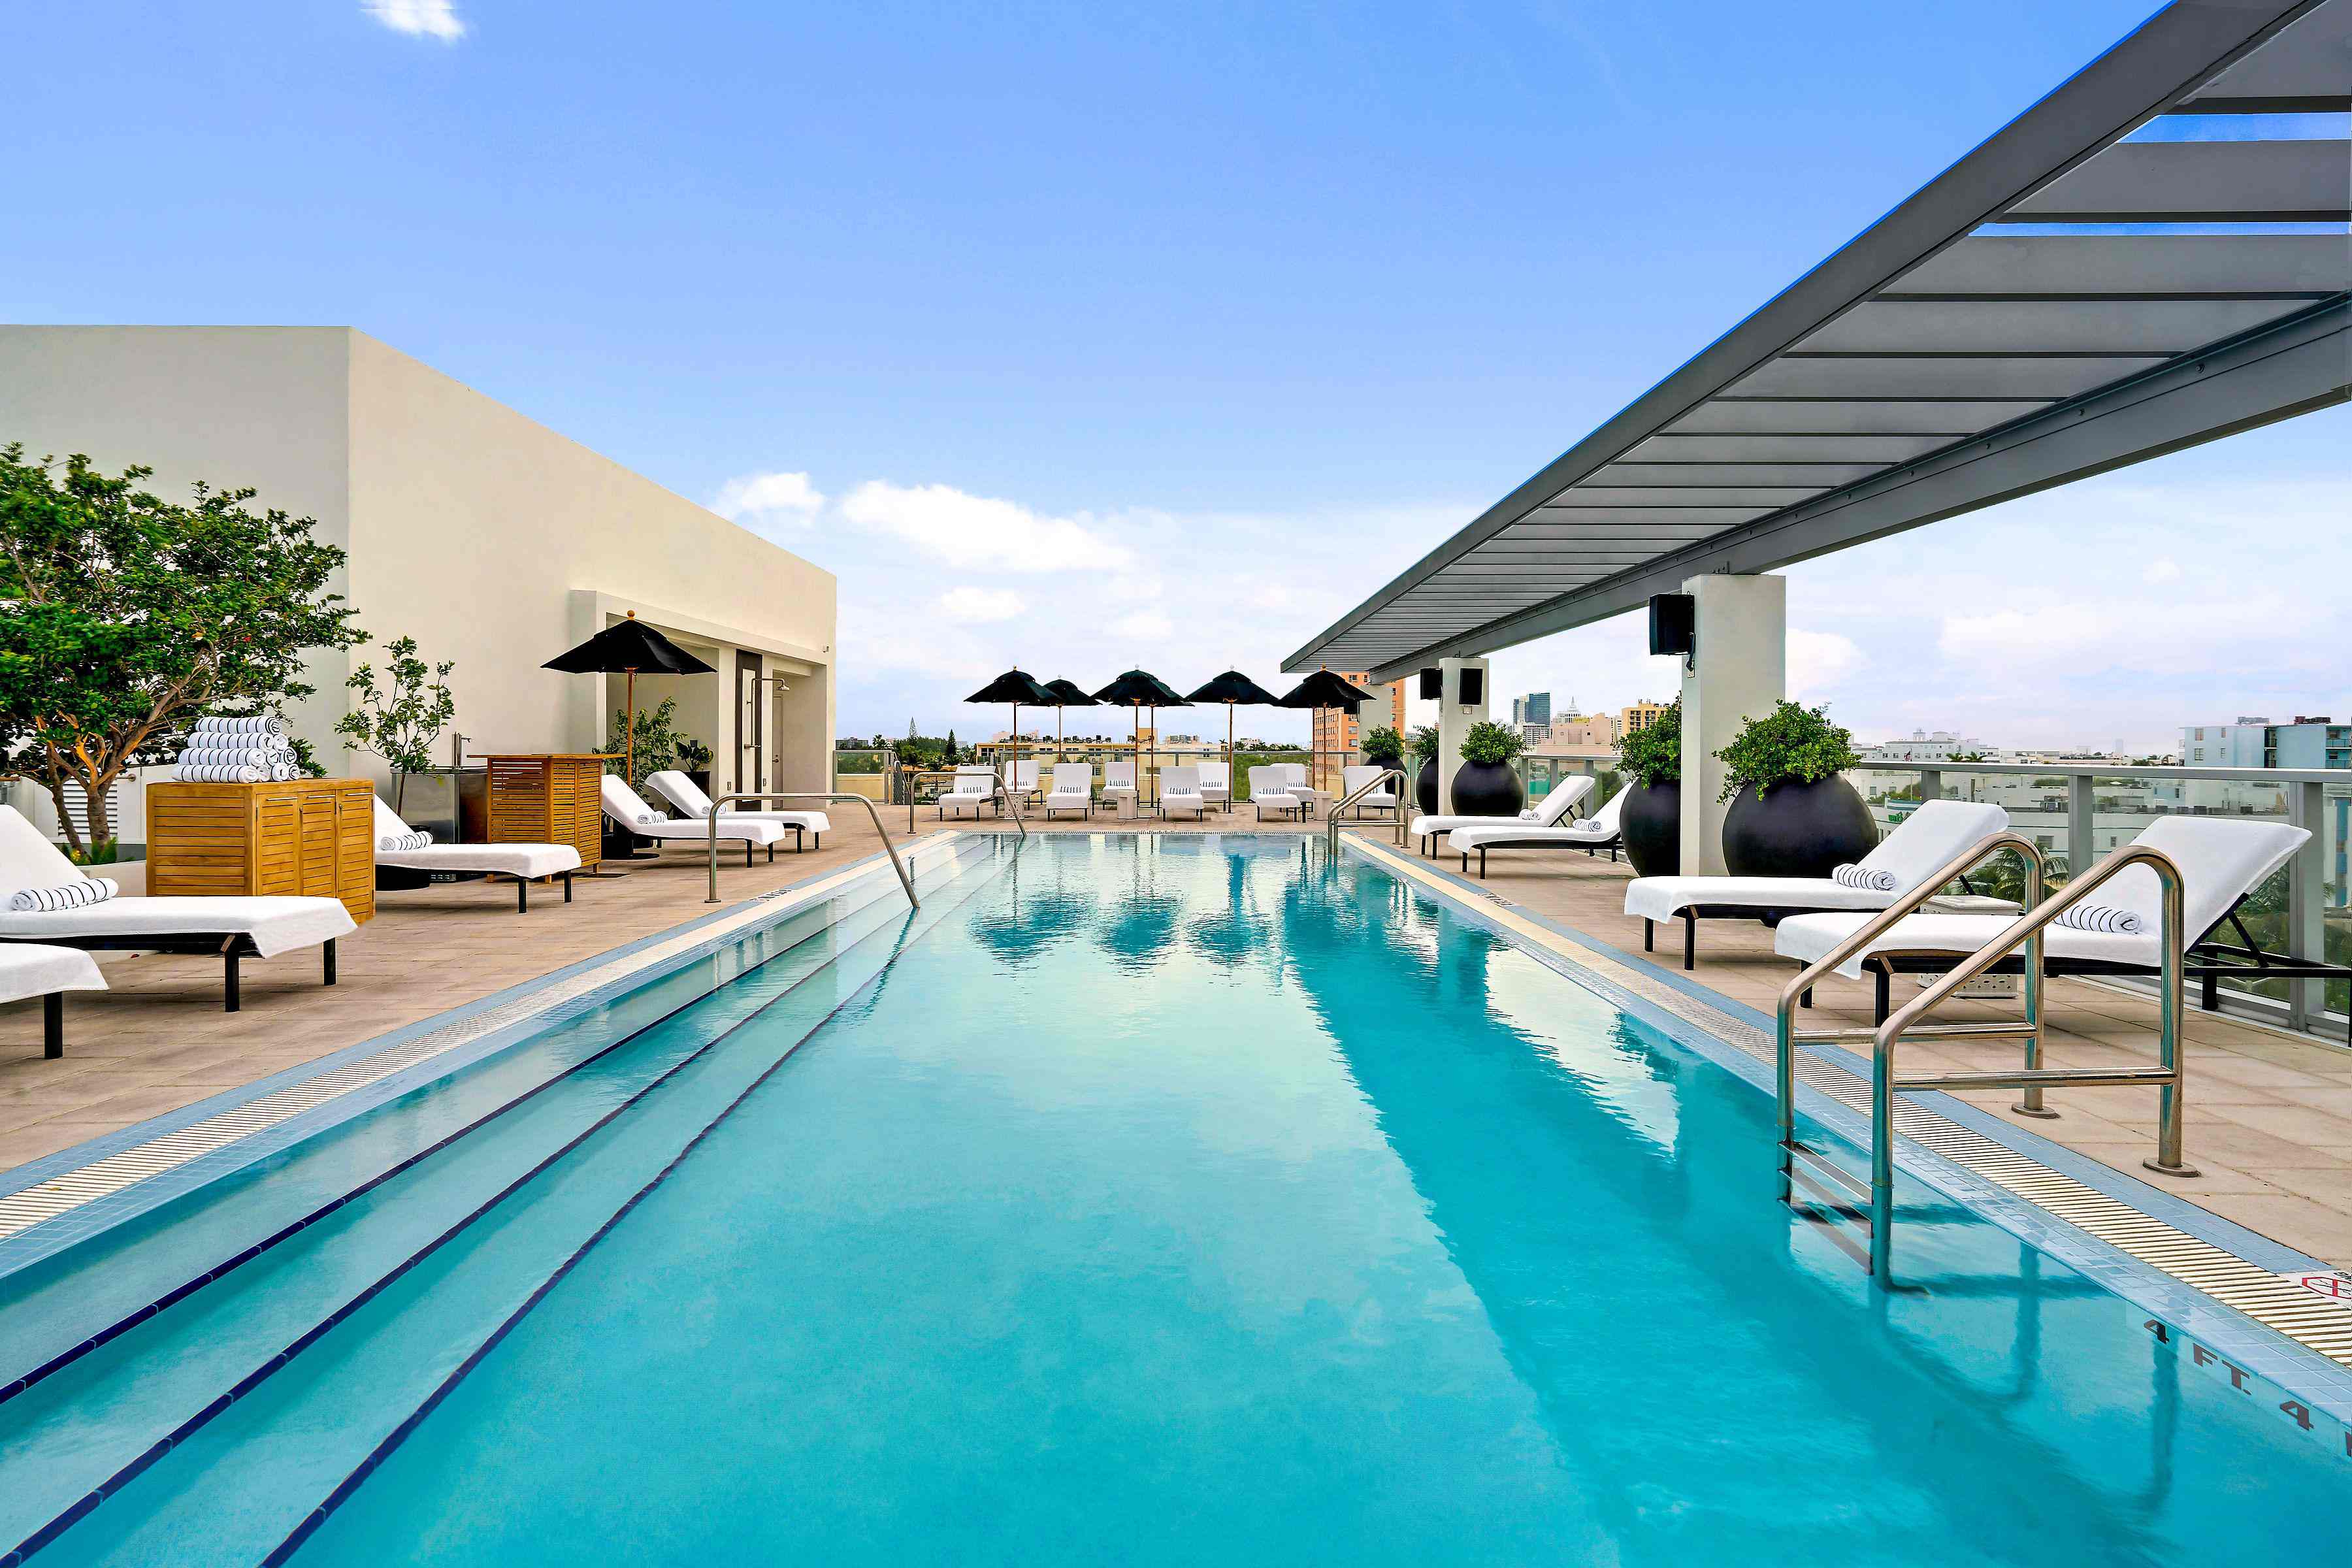 Rooftop Pool and lounge